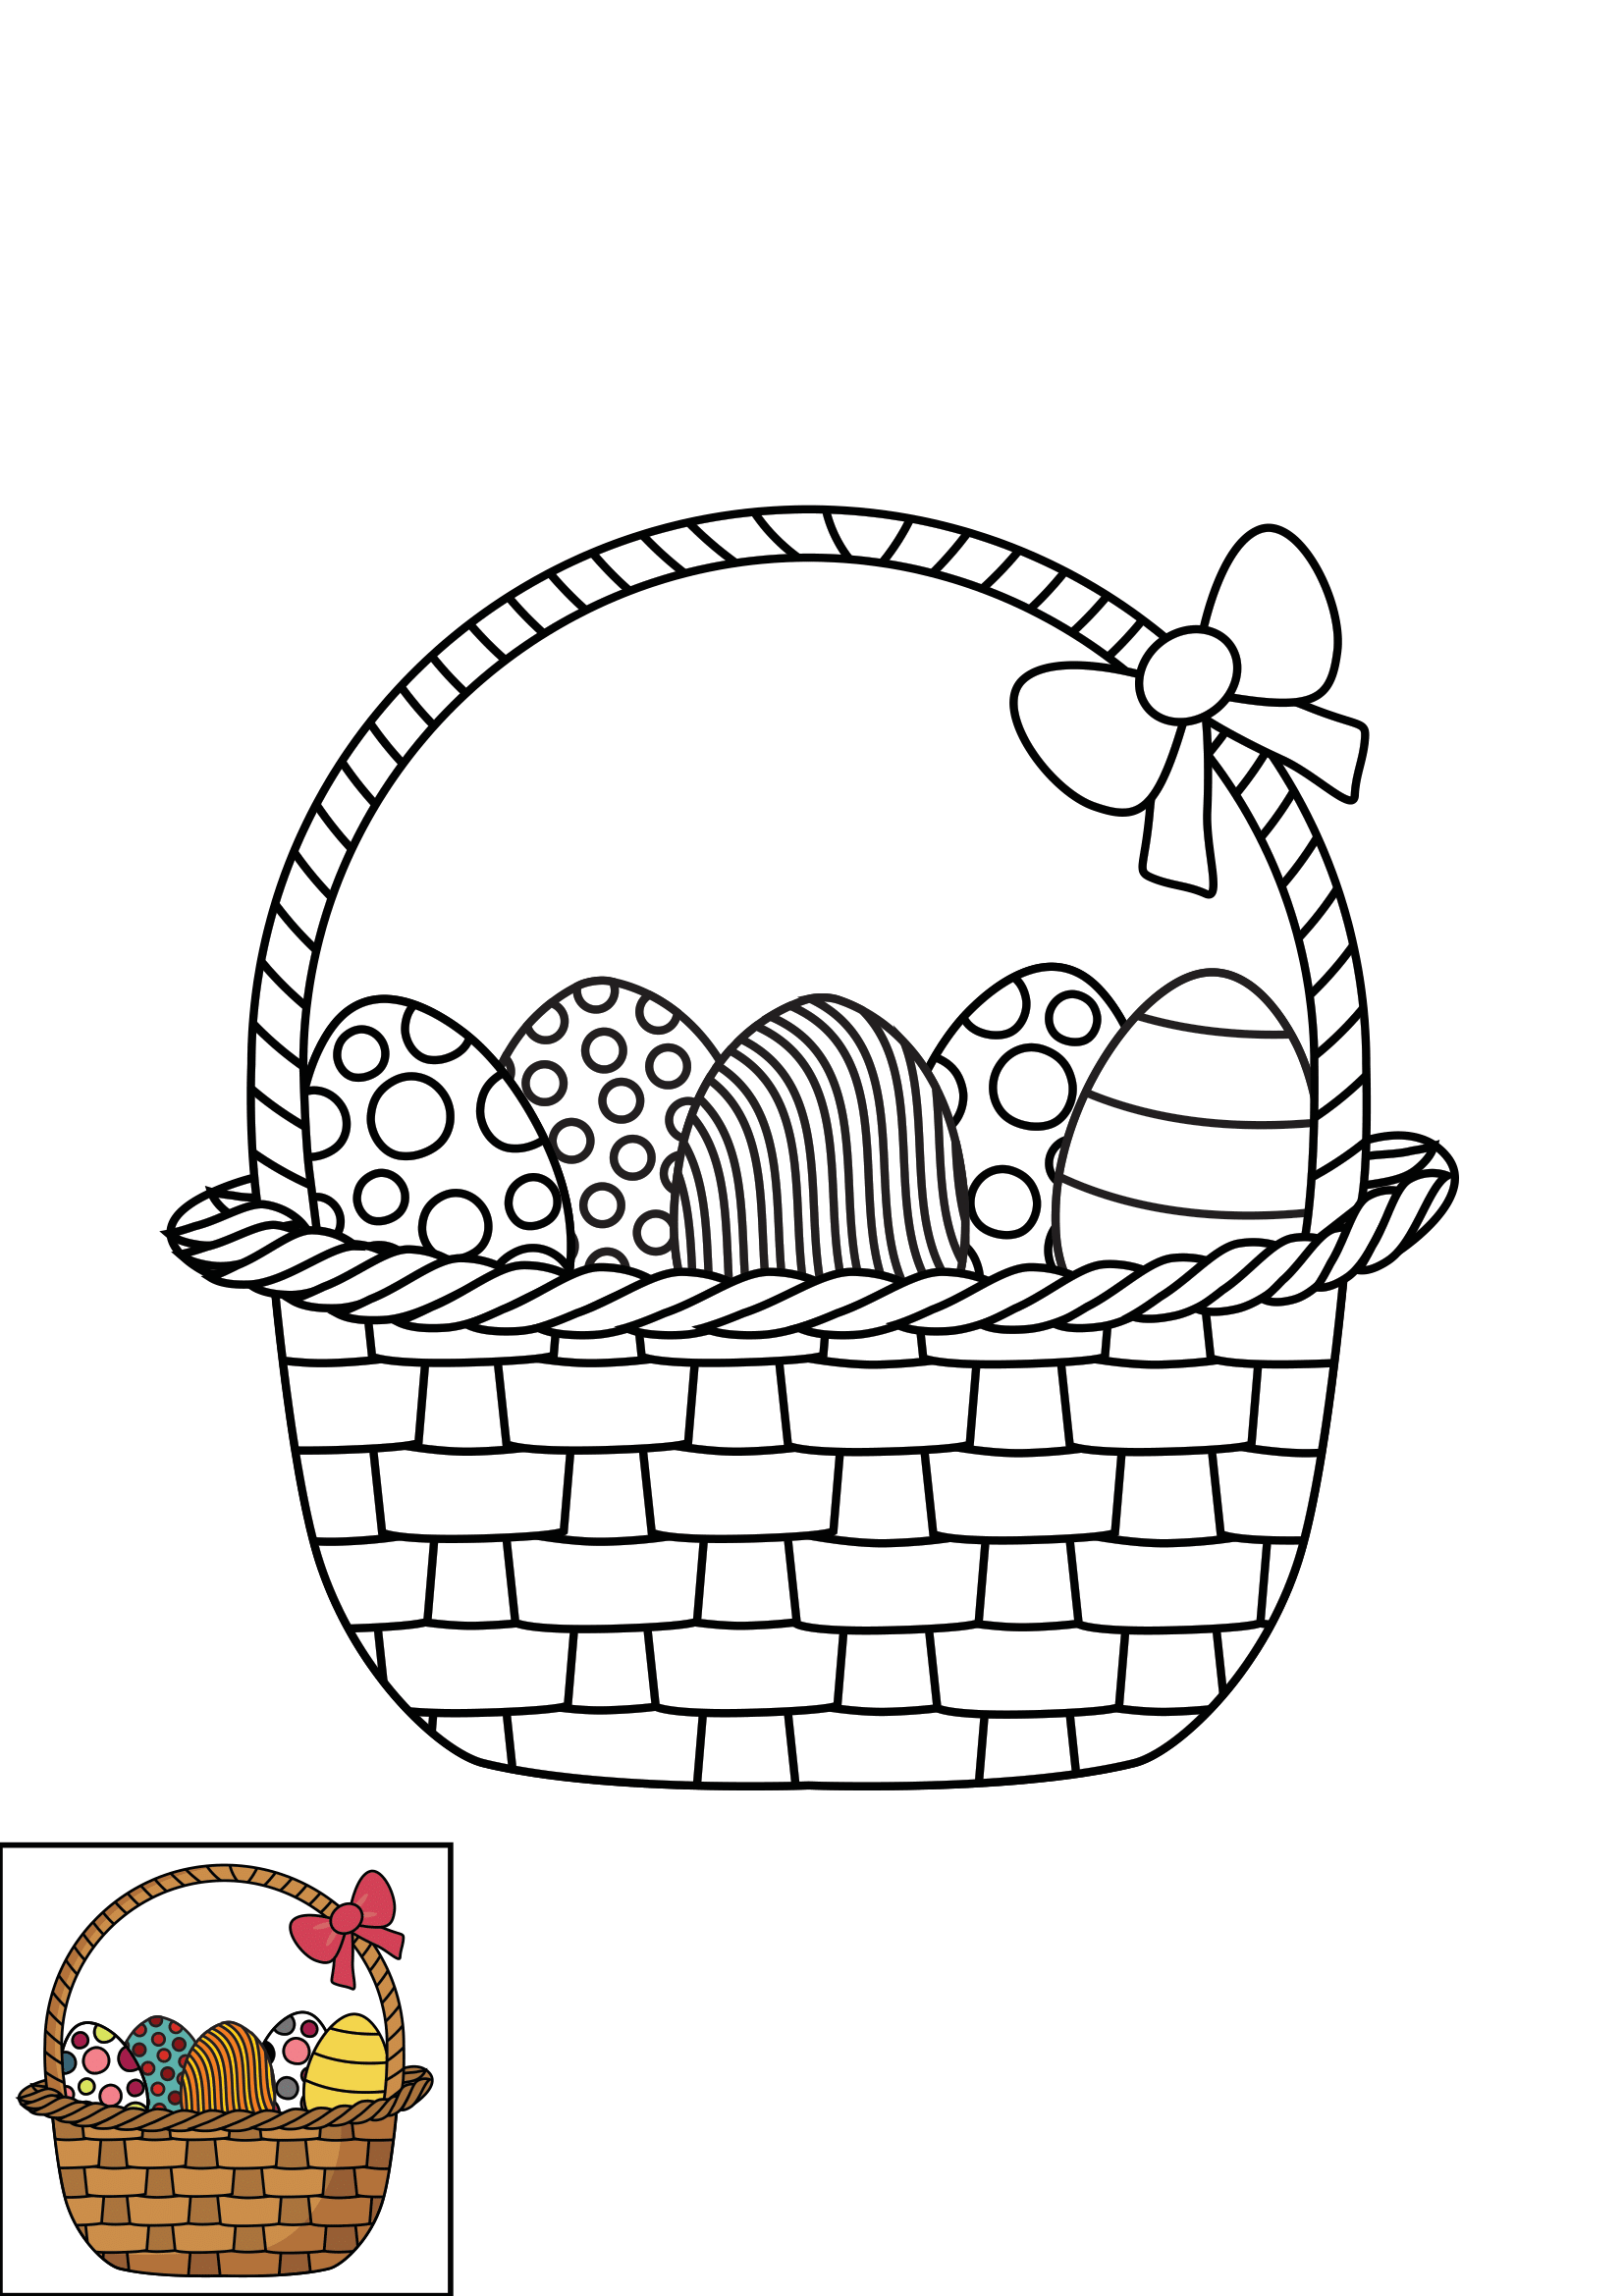 How to Draw An Easter Basket Step by Step Printable Color